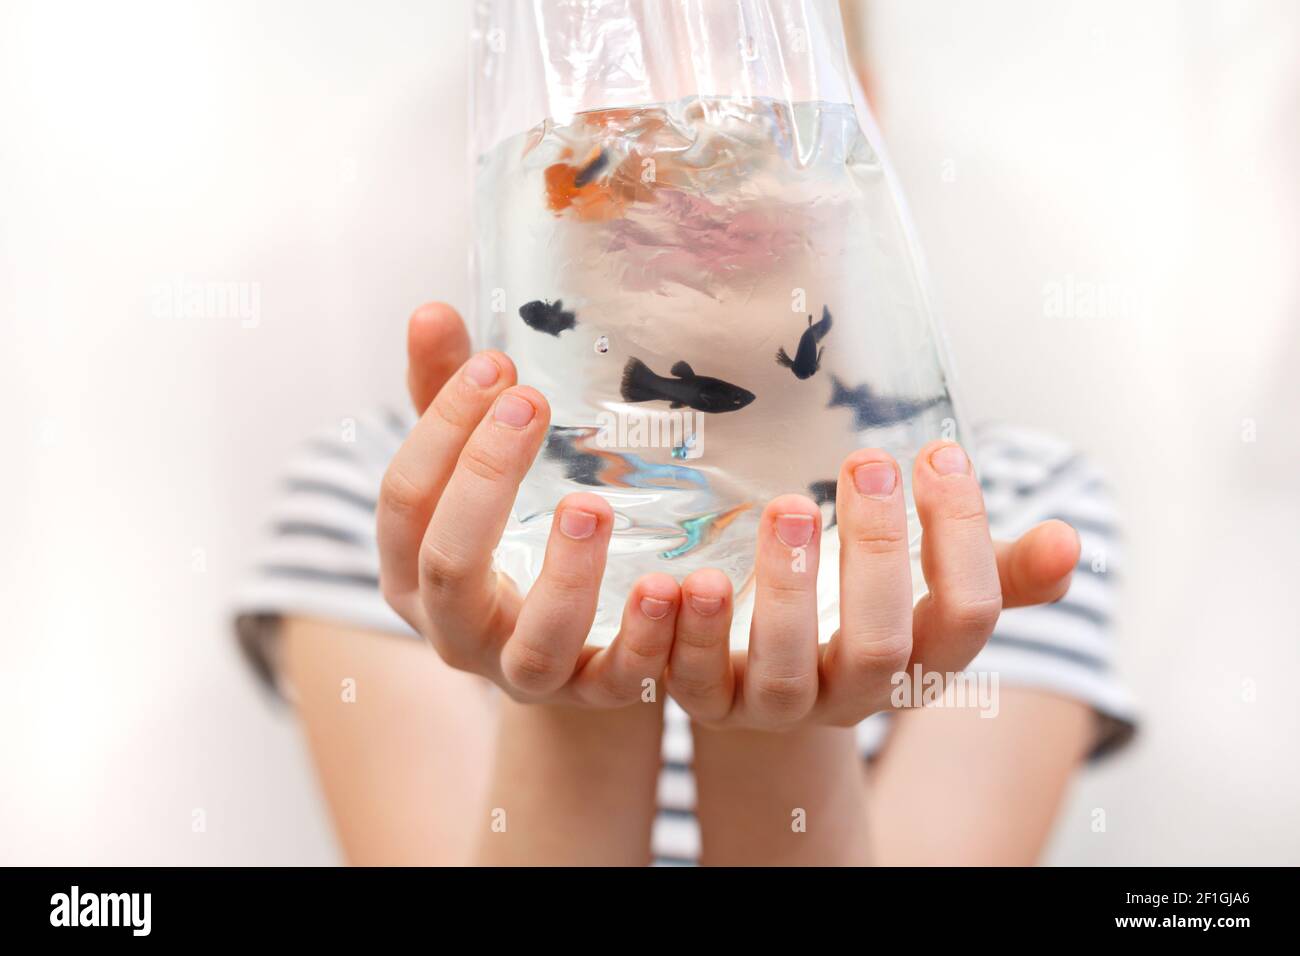 Small fish in a plastic bag in the hands of a child on a light background. Stock Photo